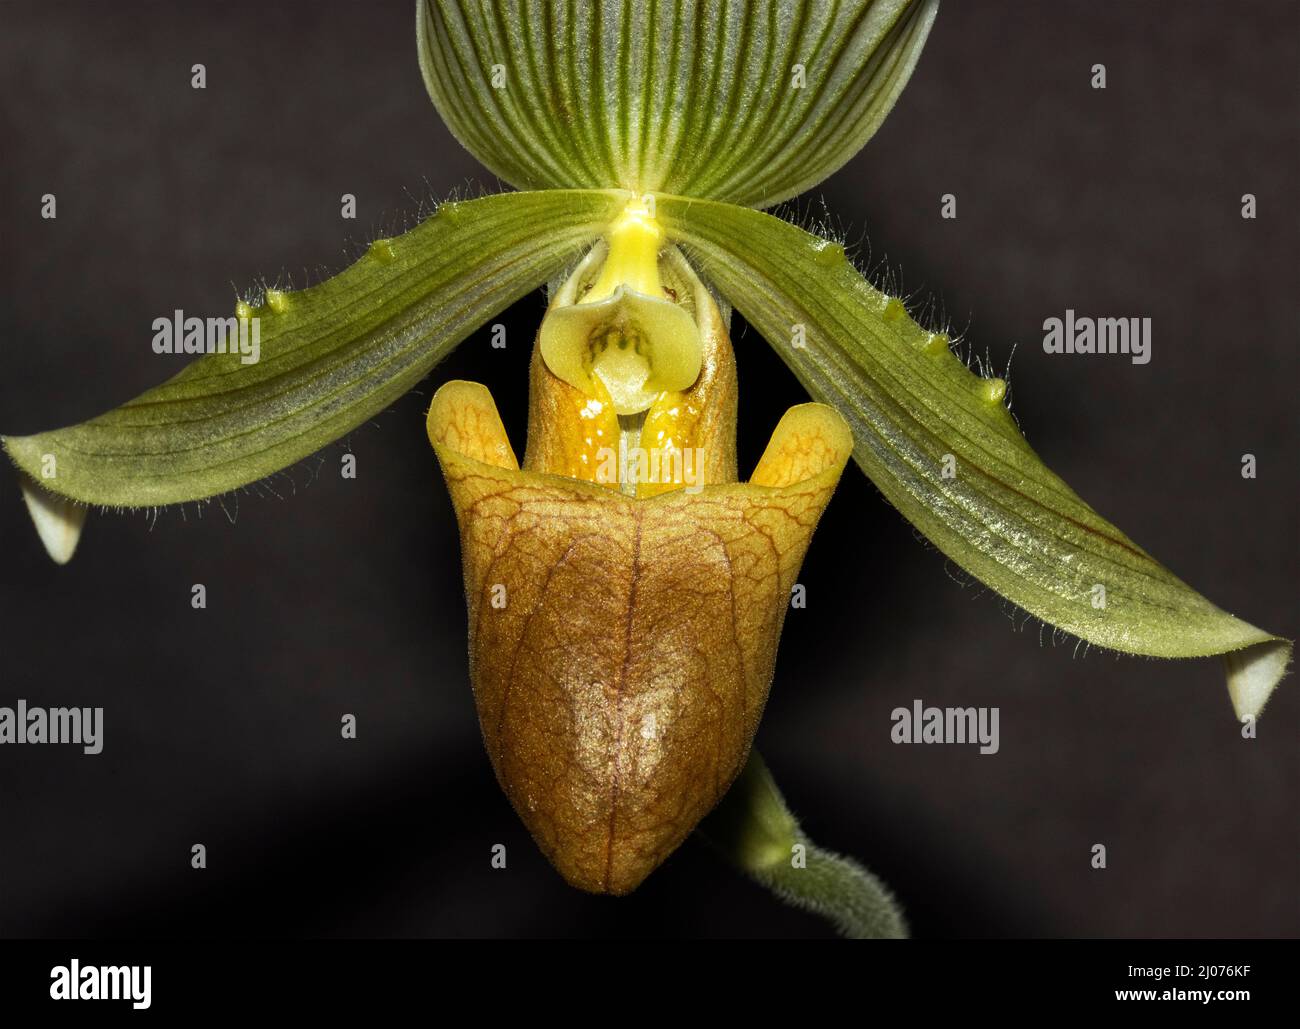 The Lady or Venus Slipper Orchid is native to SE Asia and an arboreal epiphyte of the rainforests. Their unusual shape gives rise to the name Stock Photo